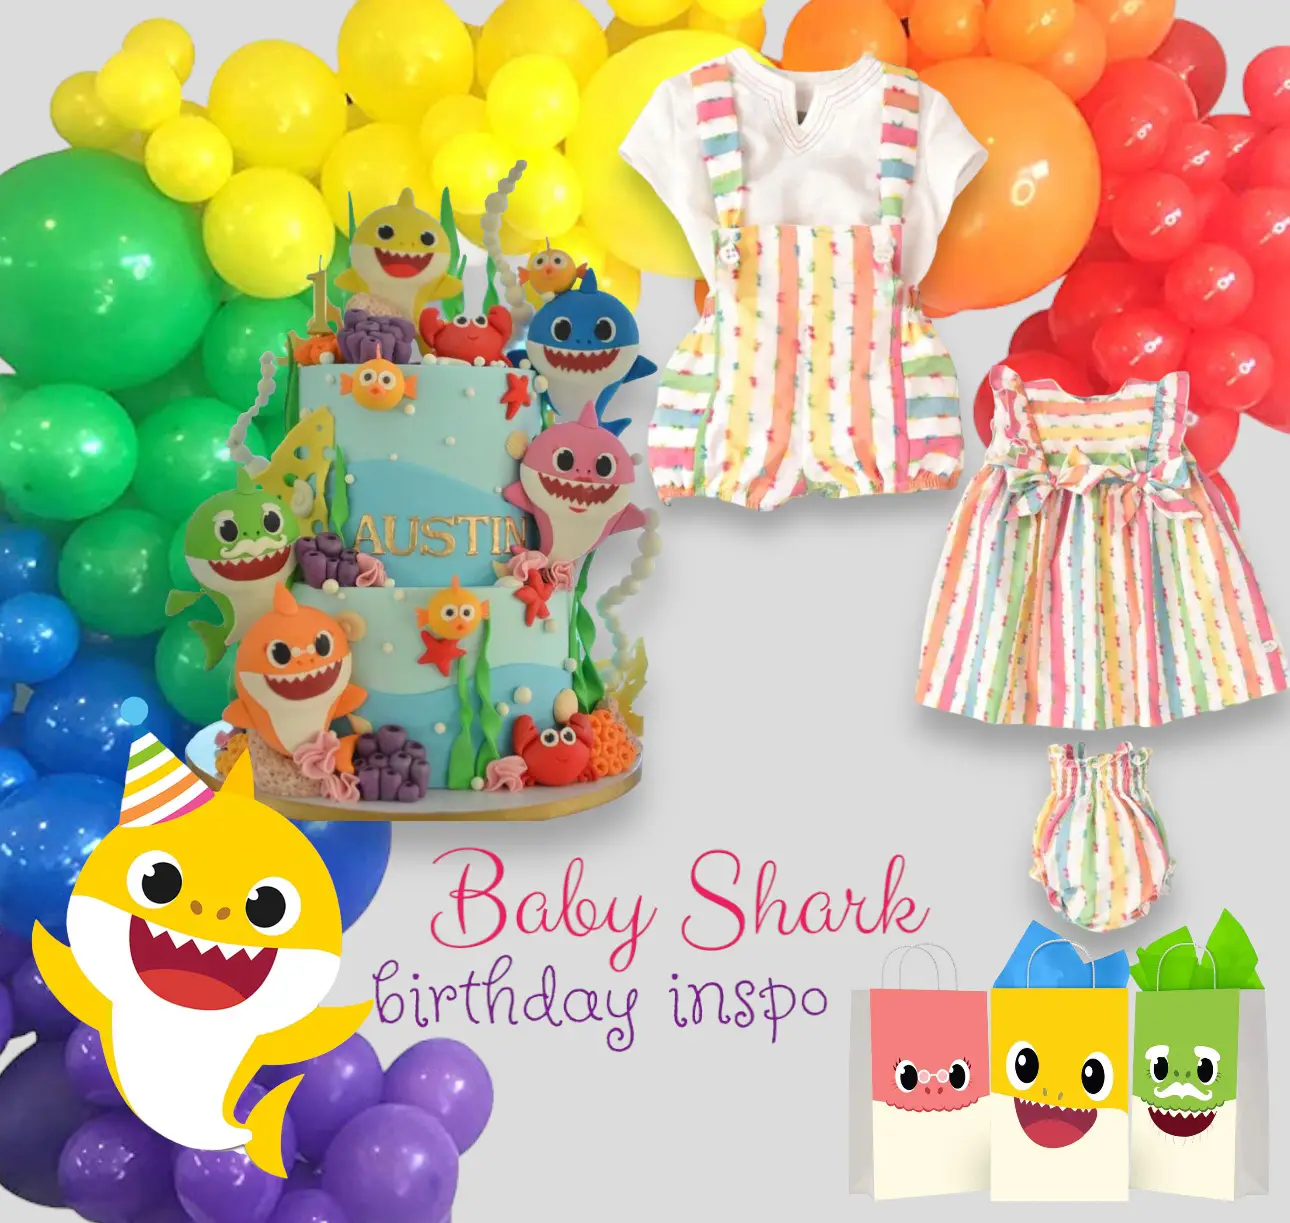 BABY SHARK BIRTHDAY PARTY INSPO  Gallery posted by Piccoli&Co